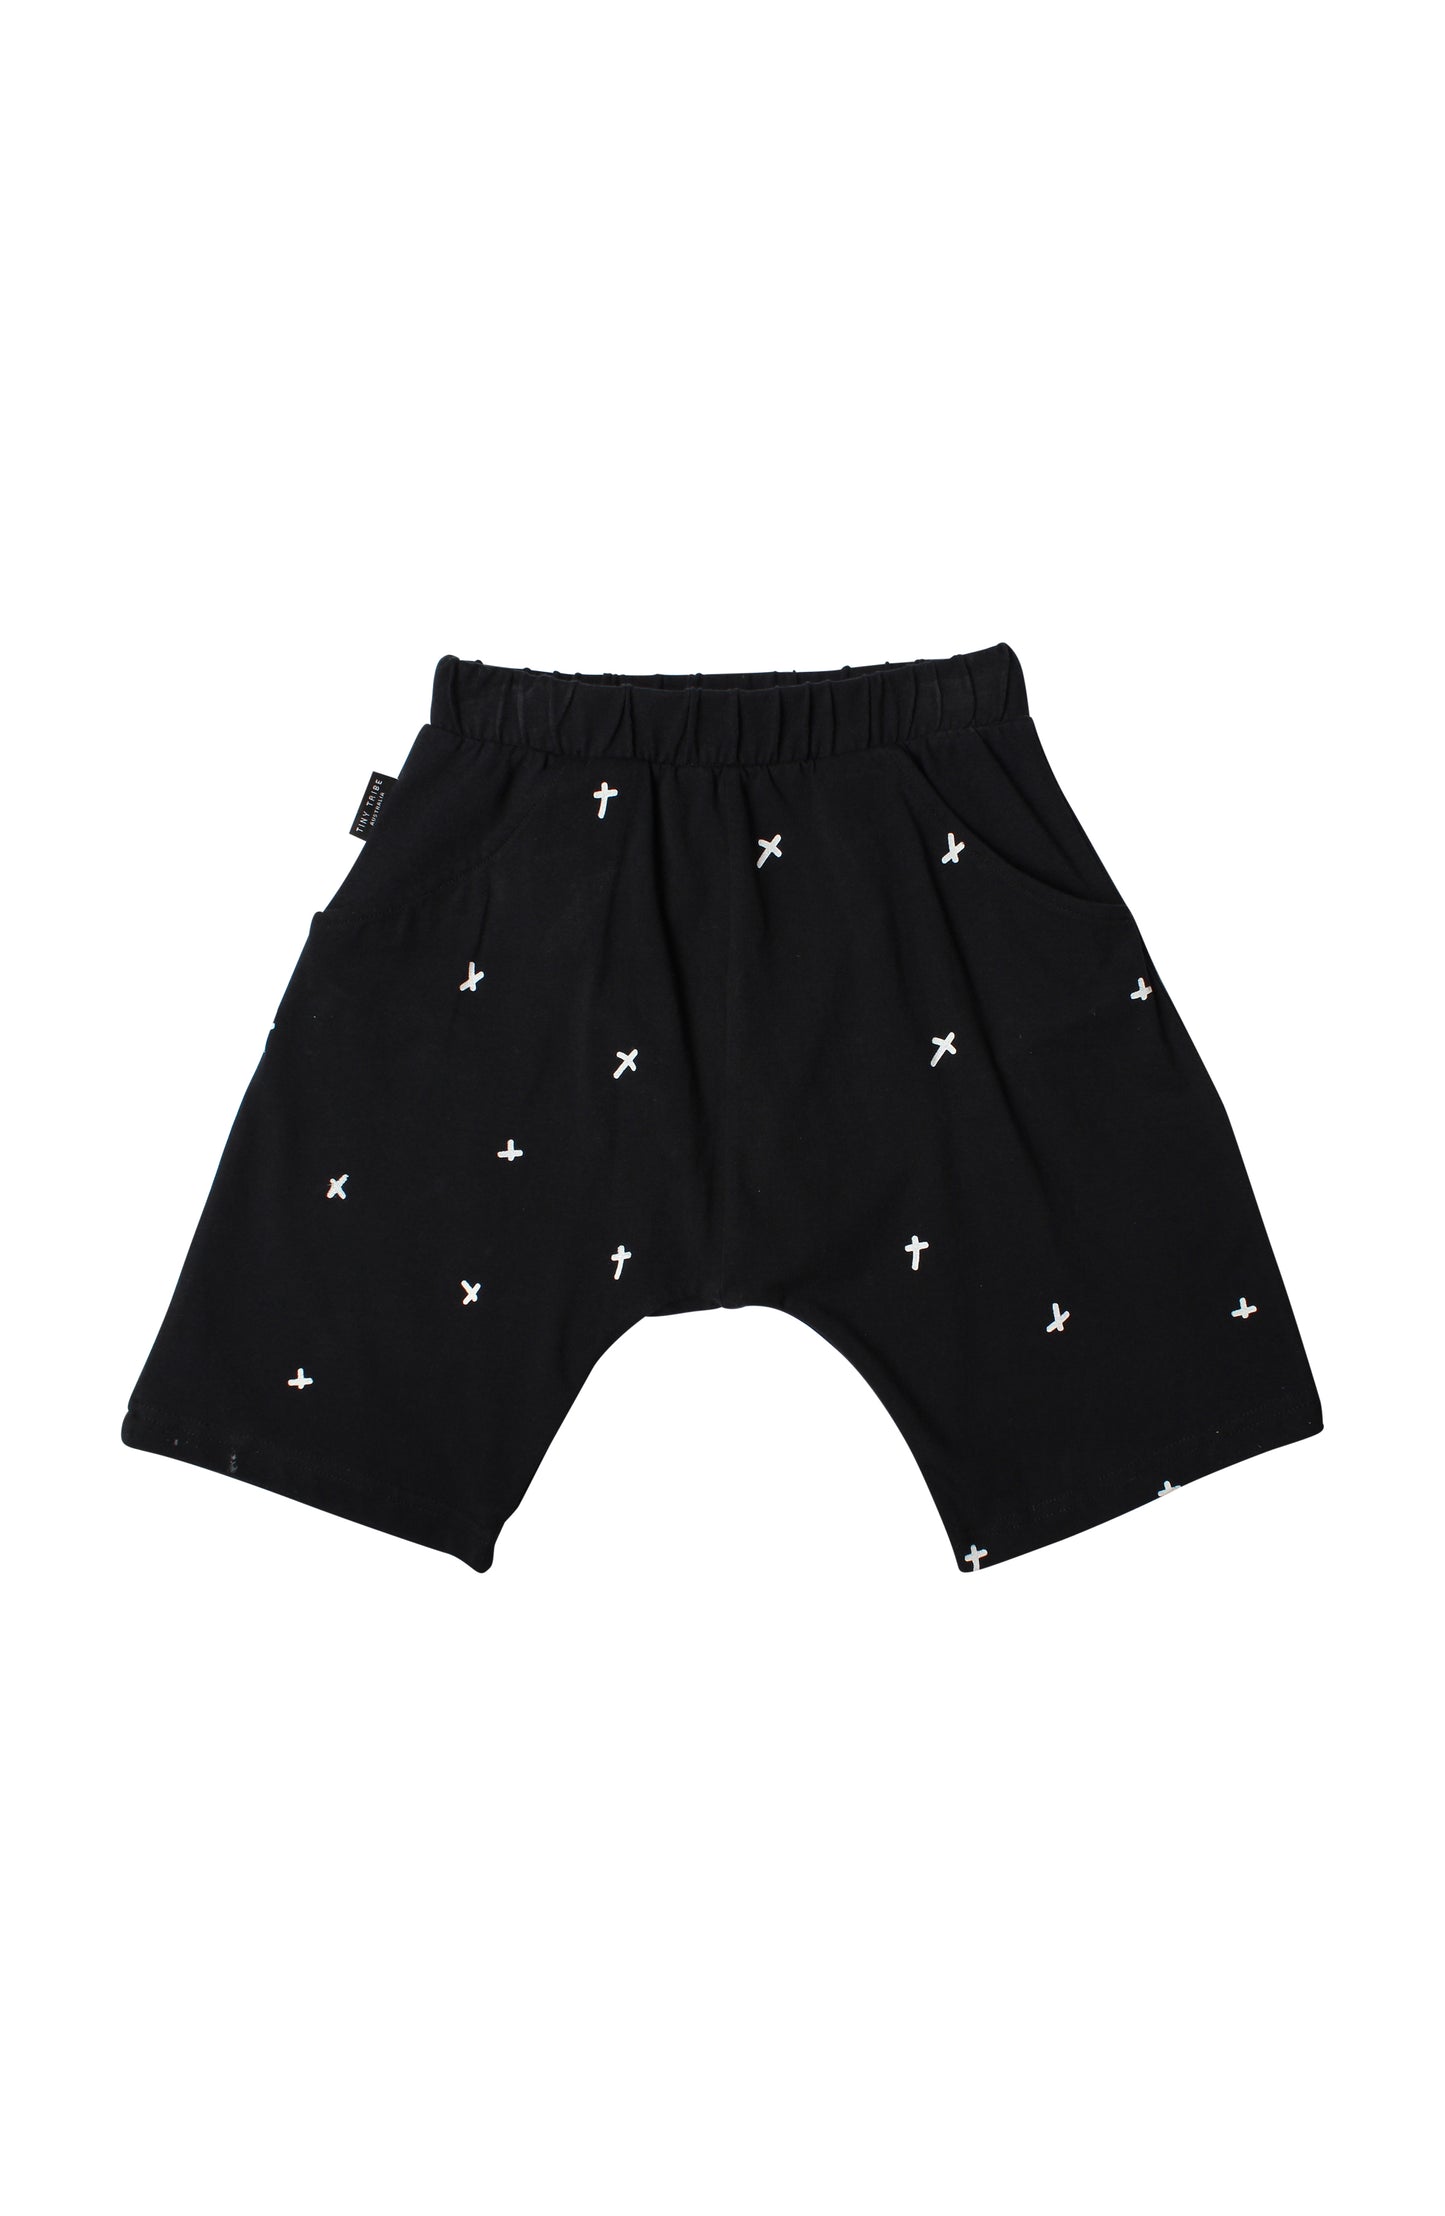 *Last One* Tiny Tribe X Relaxed Short Black - Size 4yr